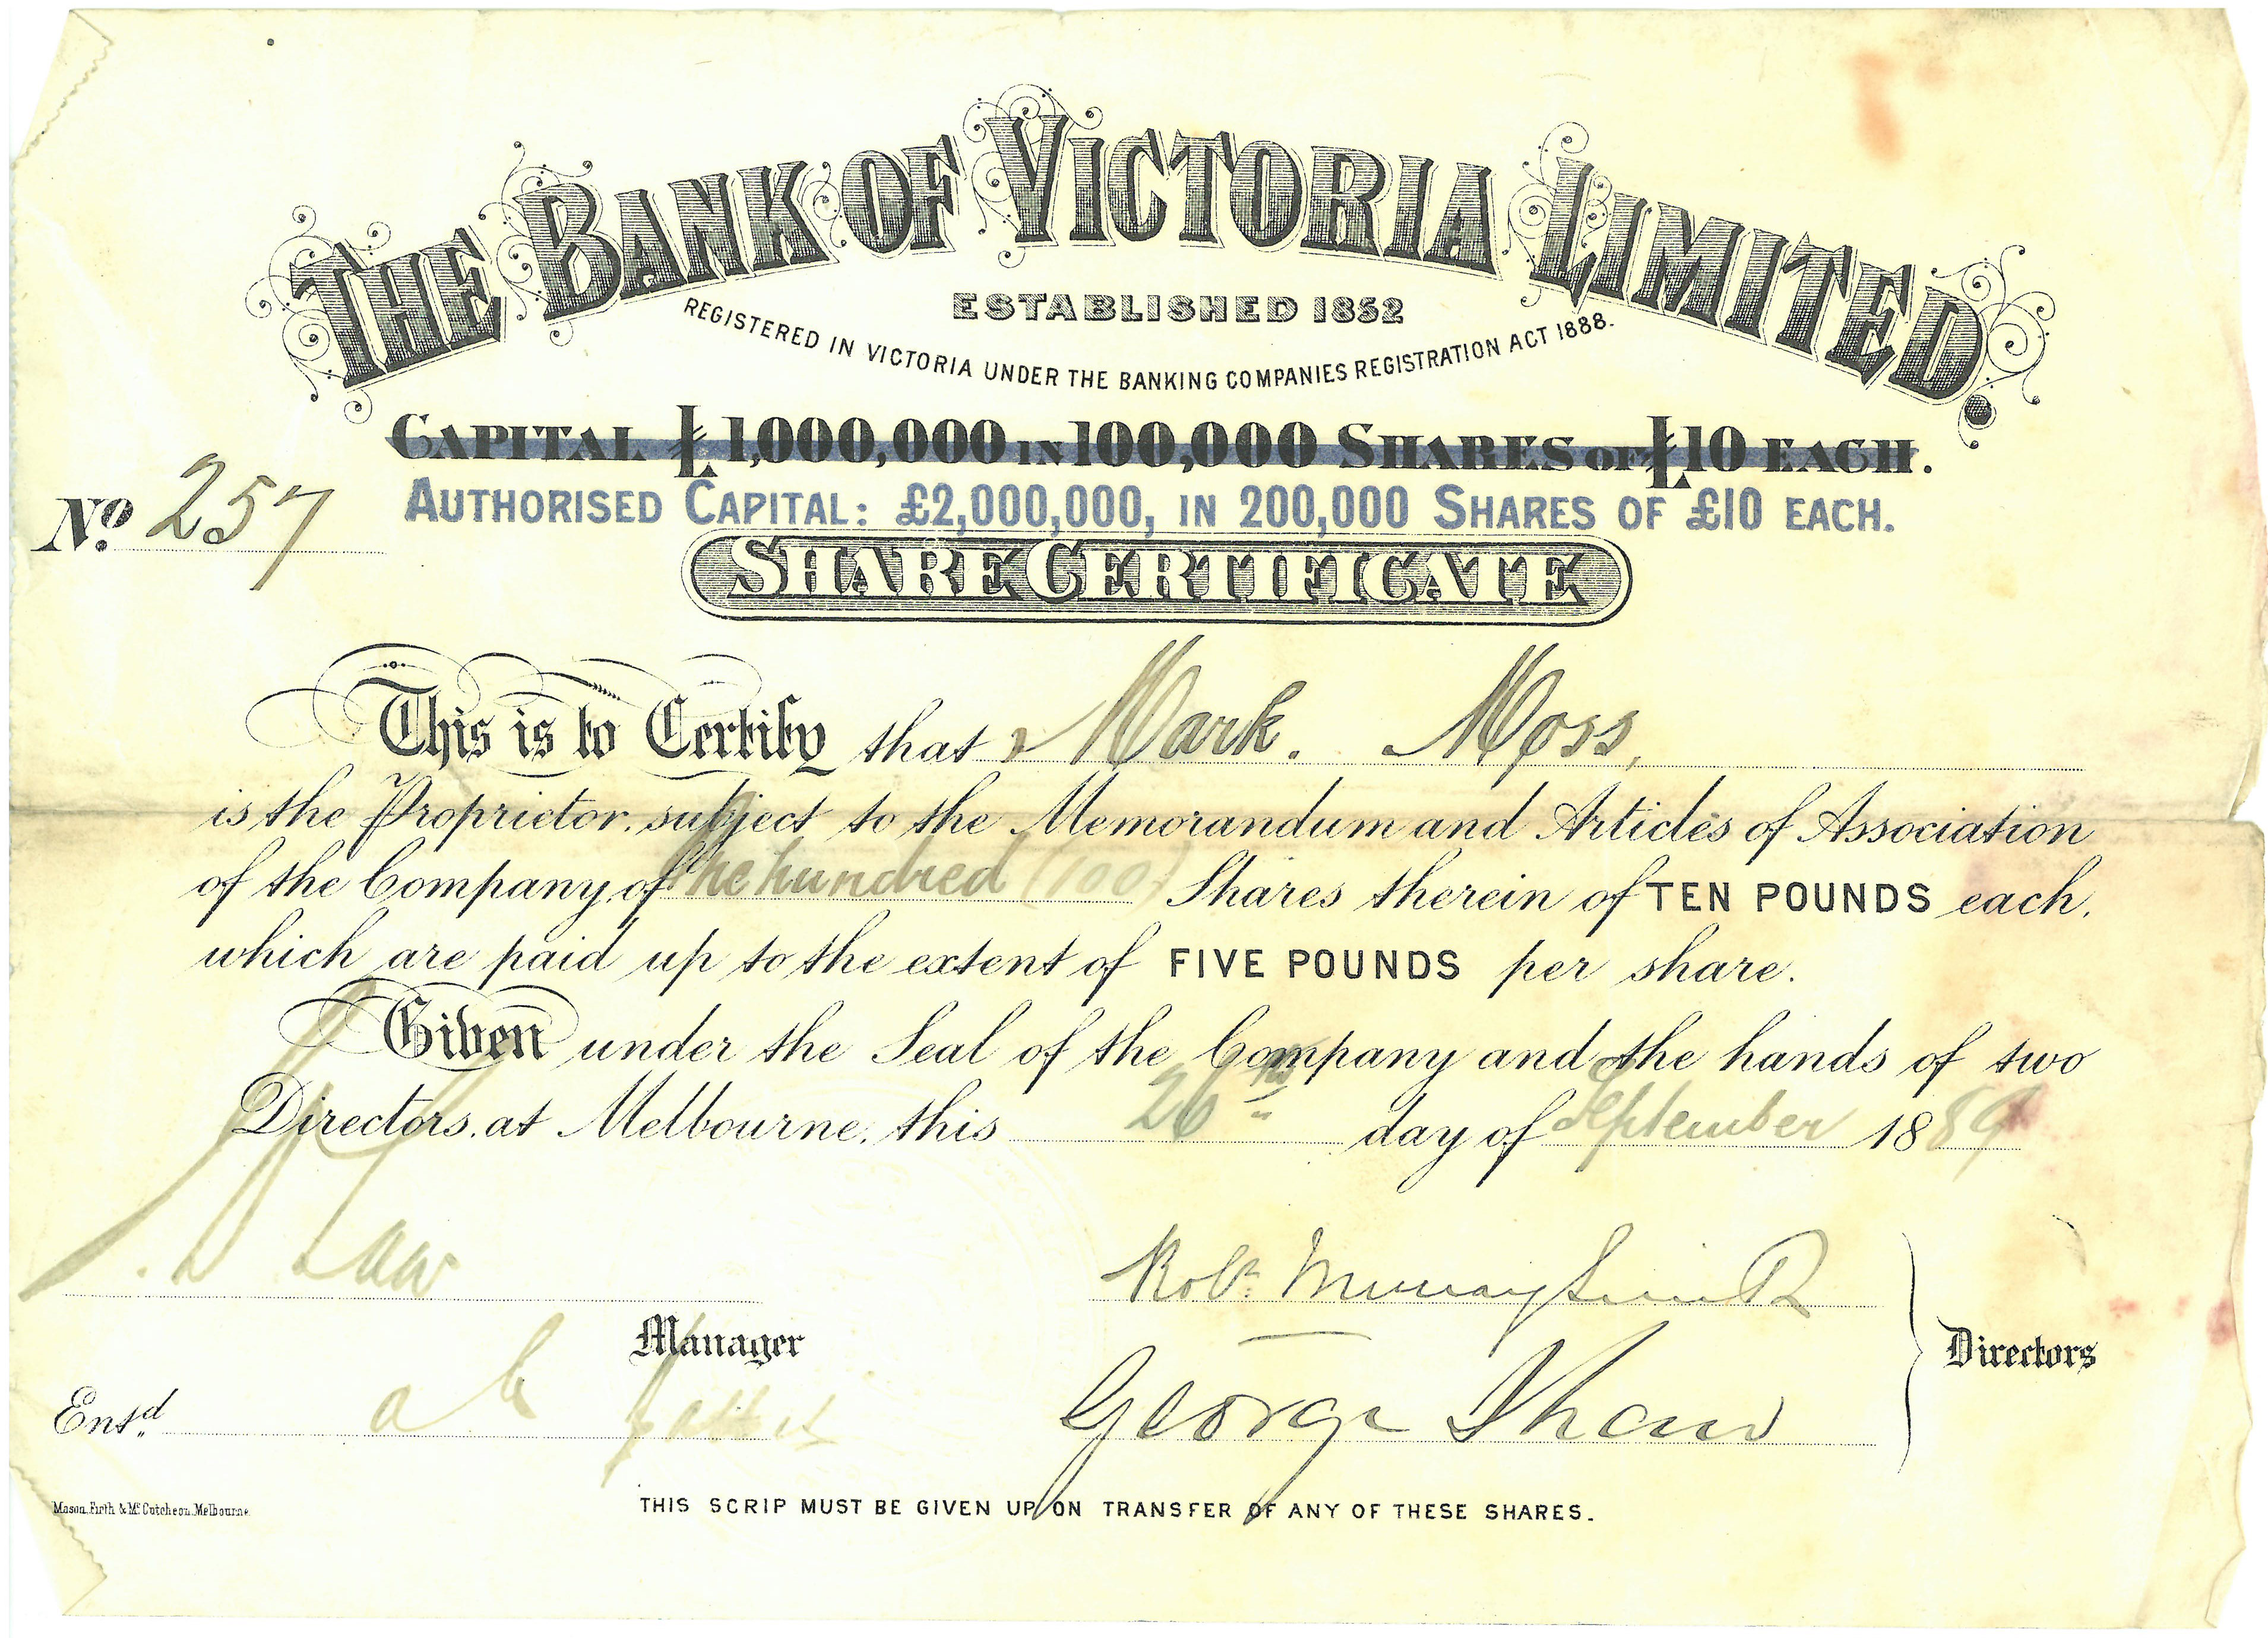 A share certificate from 1889